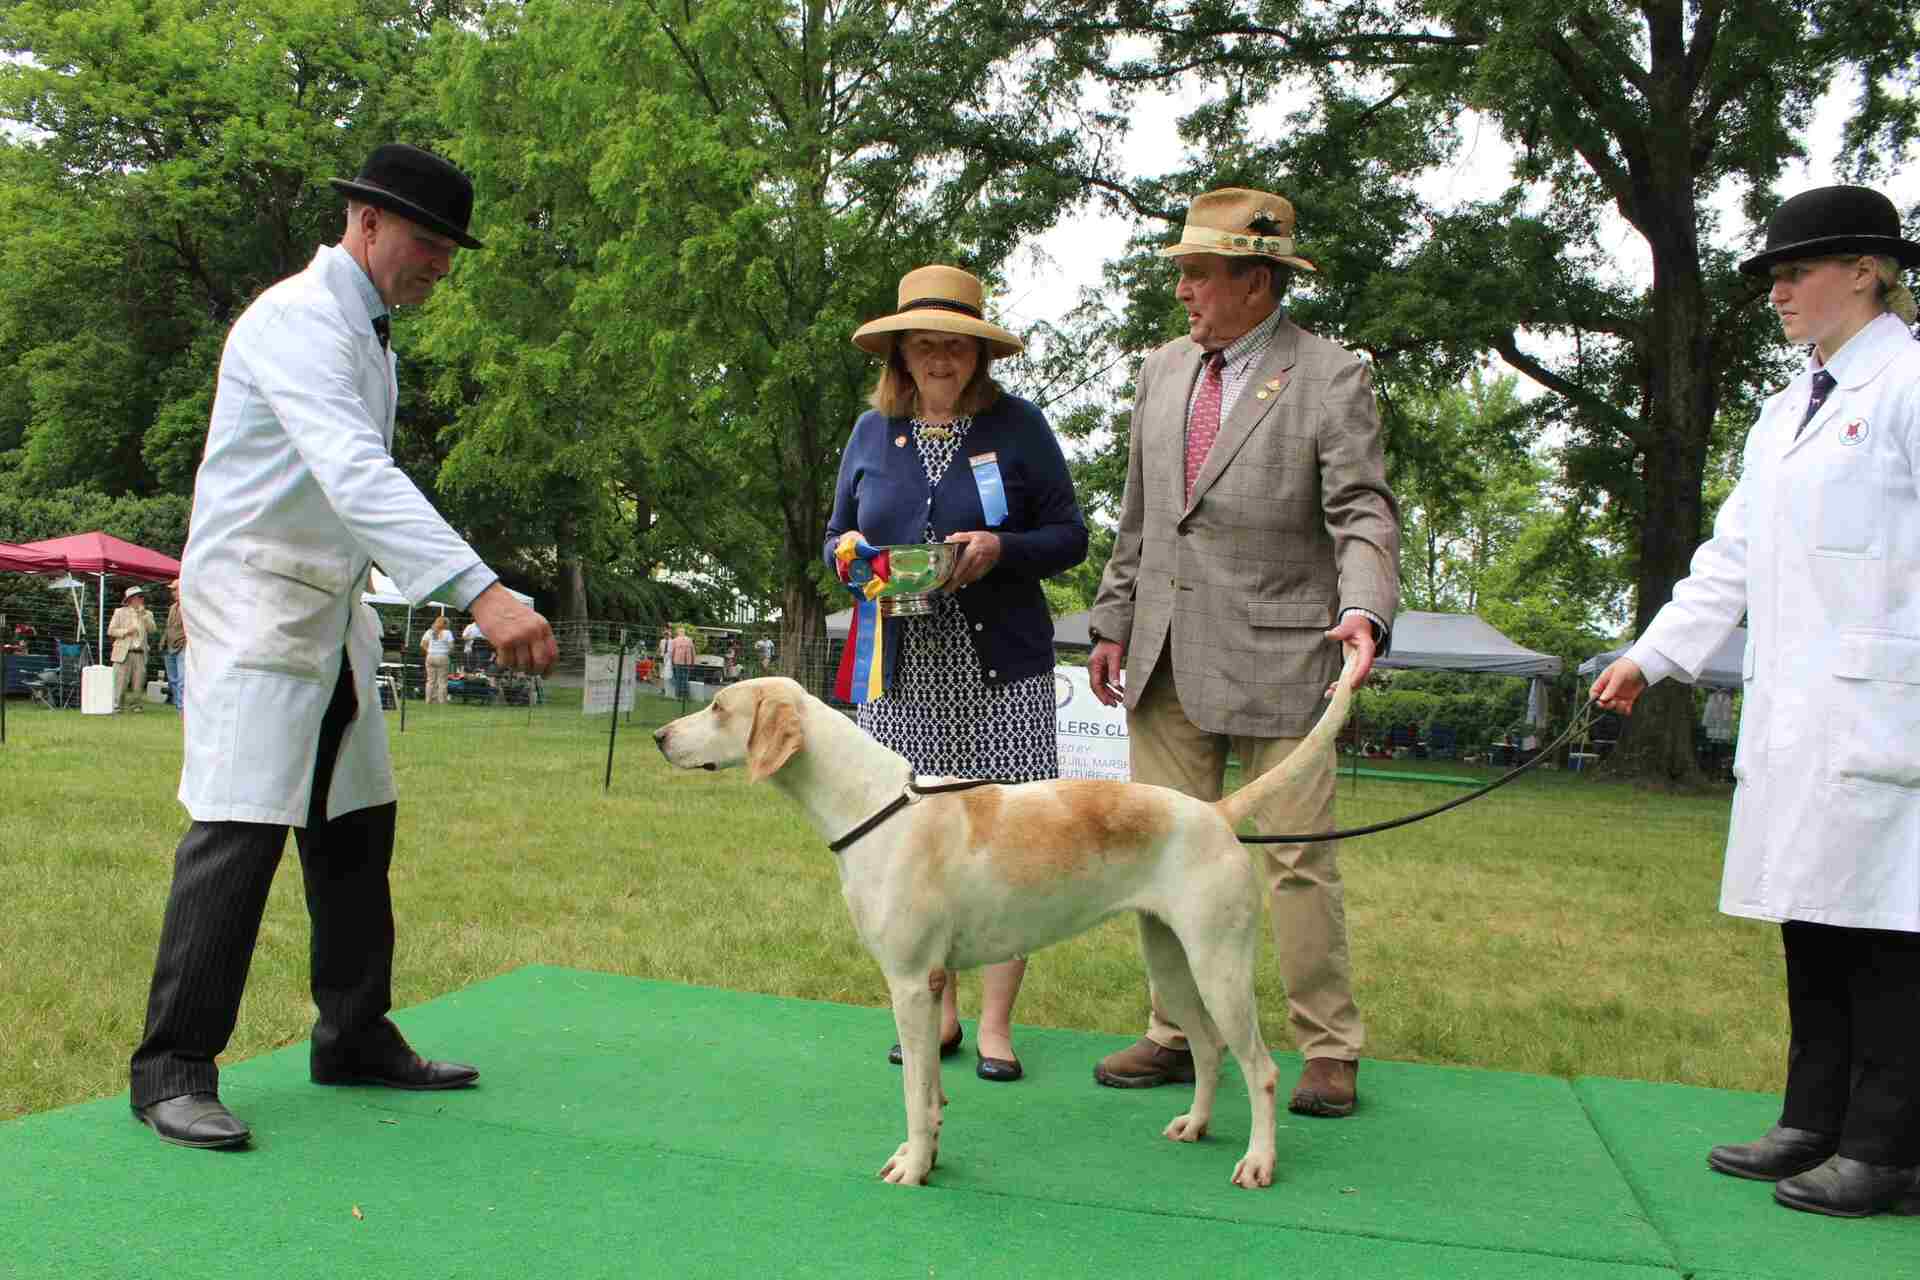 Grand Champion hound with judge, handler, and prizes